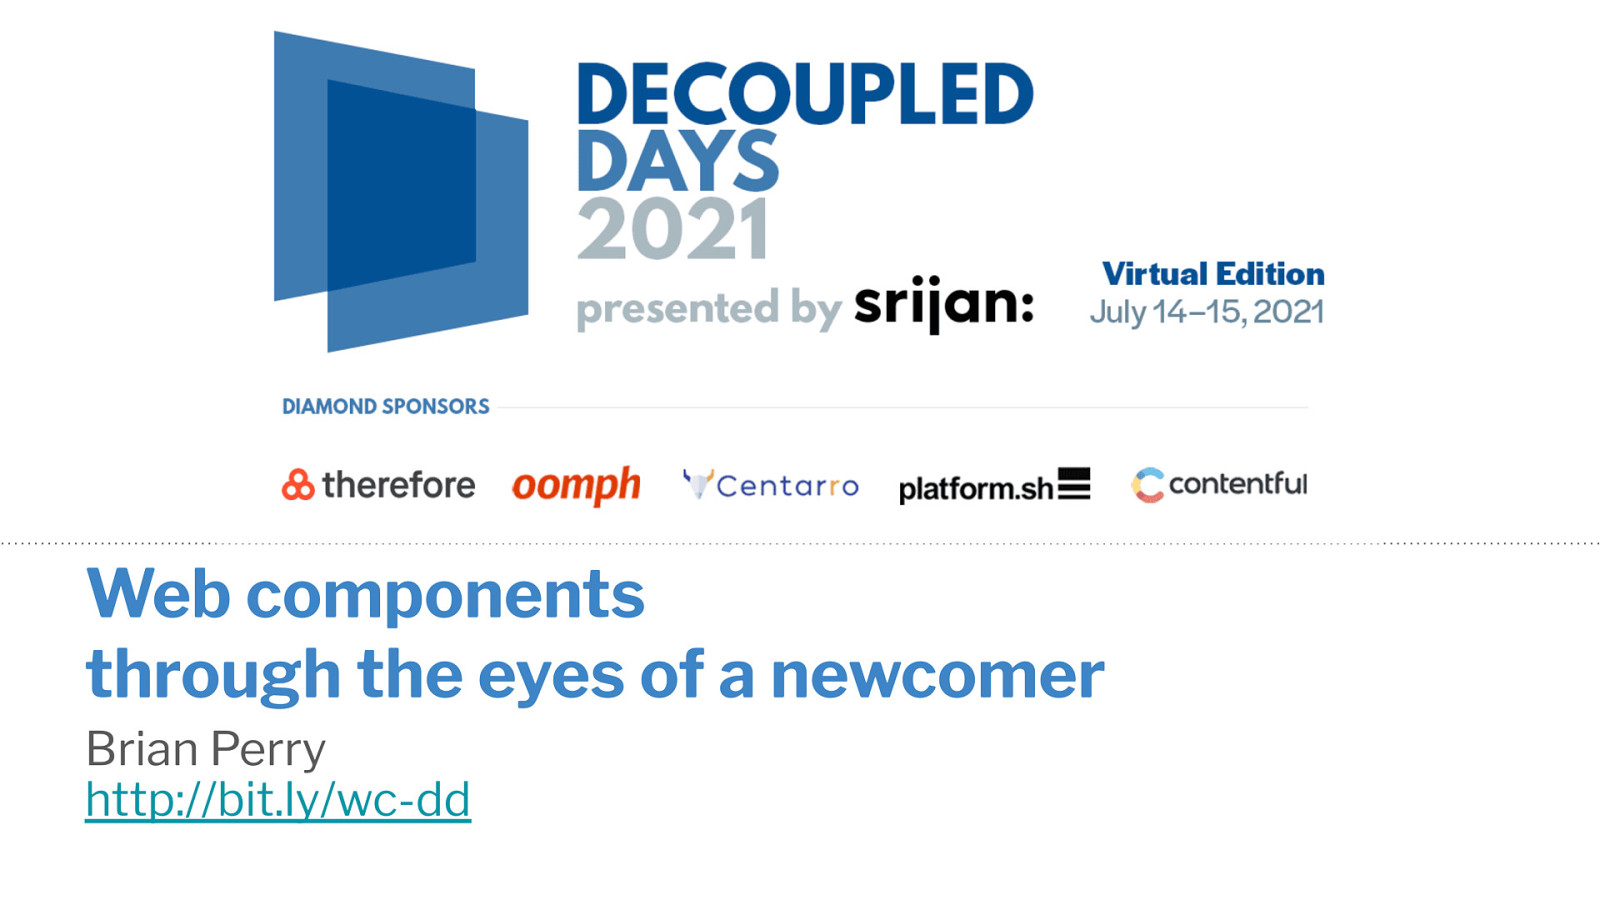  Web components through the eyes of a newcomer